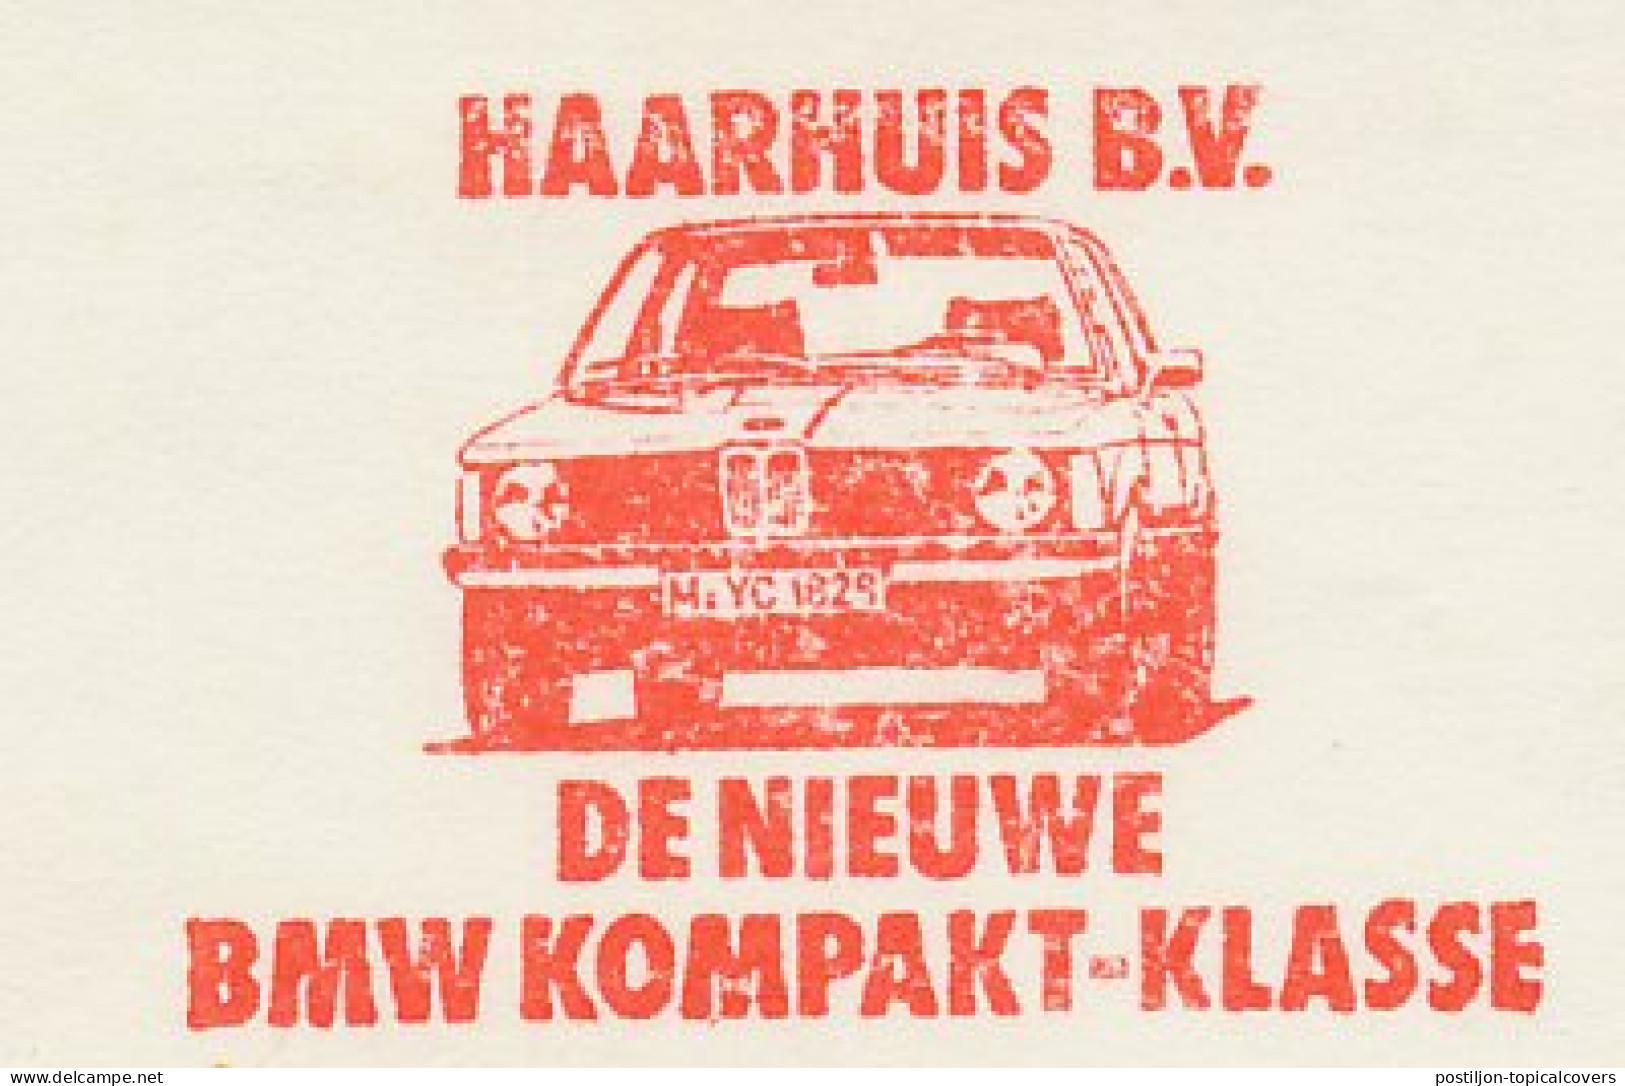 Meter Cut Netherlands 1978 Car - BMW - Coches